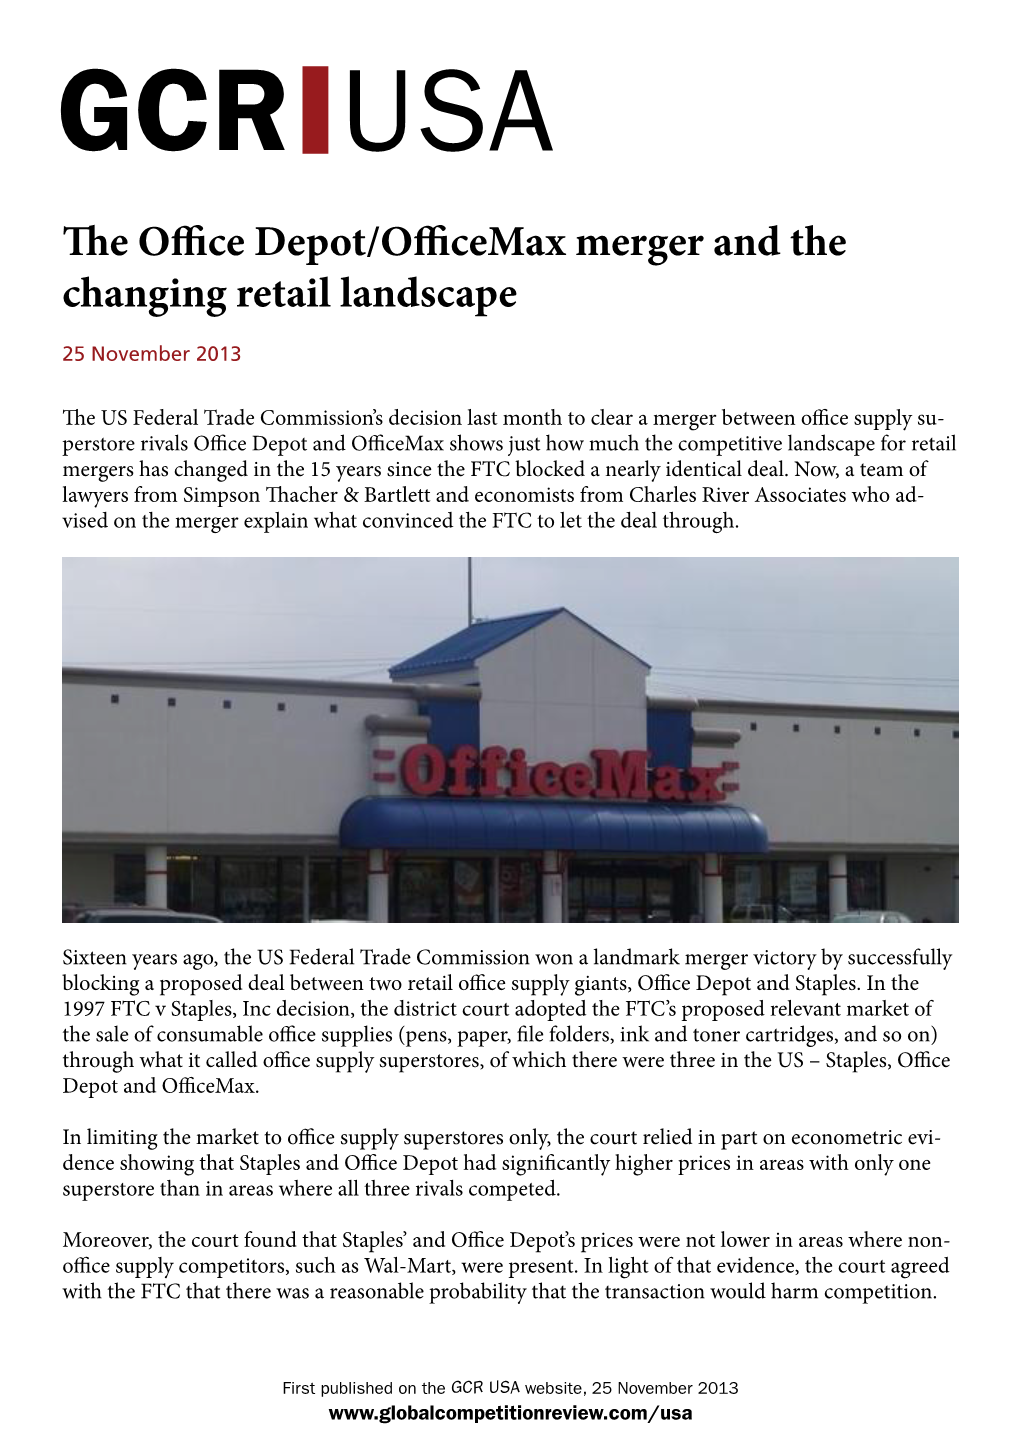 The Office Depot/Officemax Merger and the Changing Retail Landscape